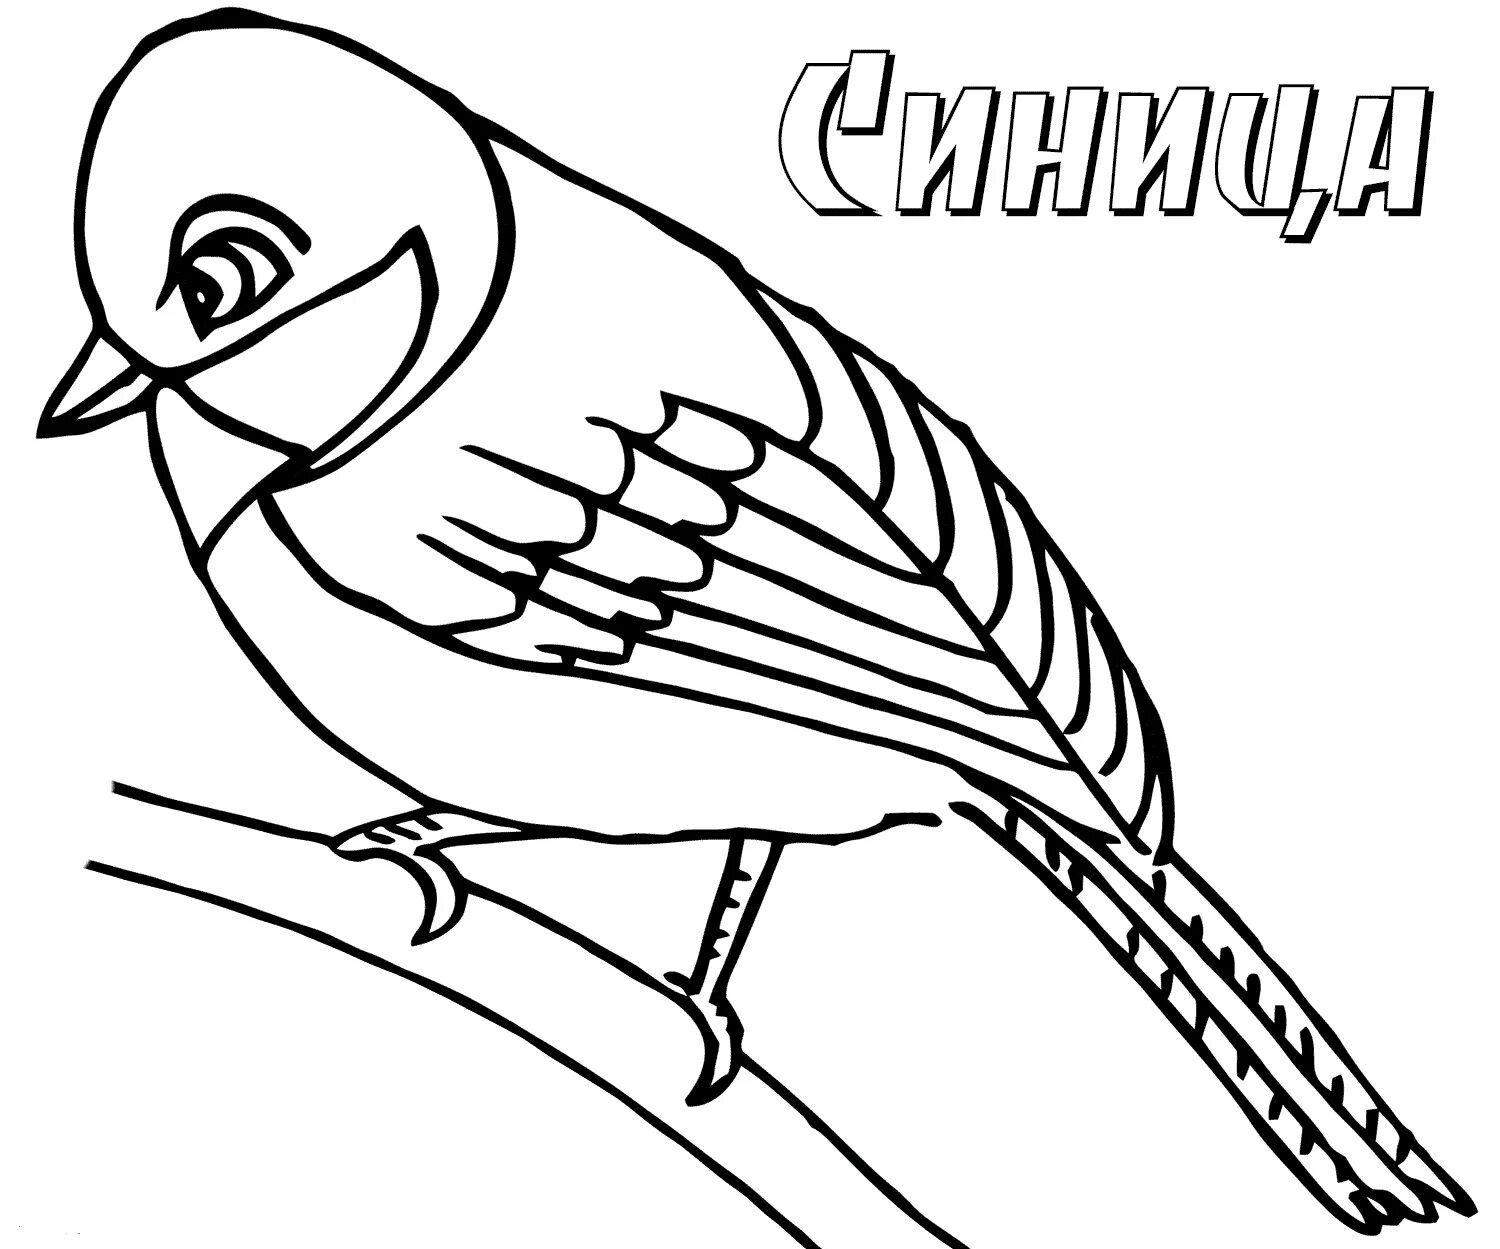 Coloring book playfulness of winter birds